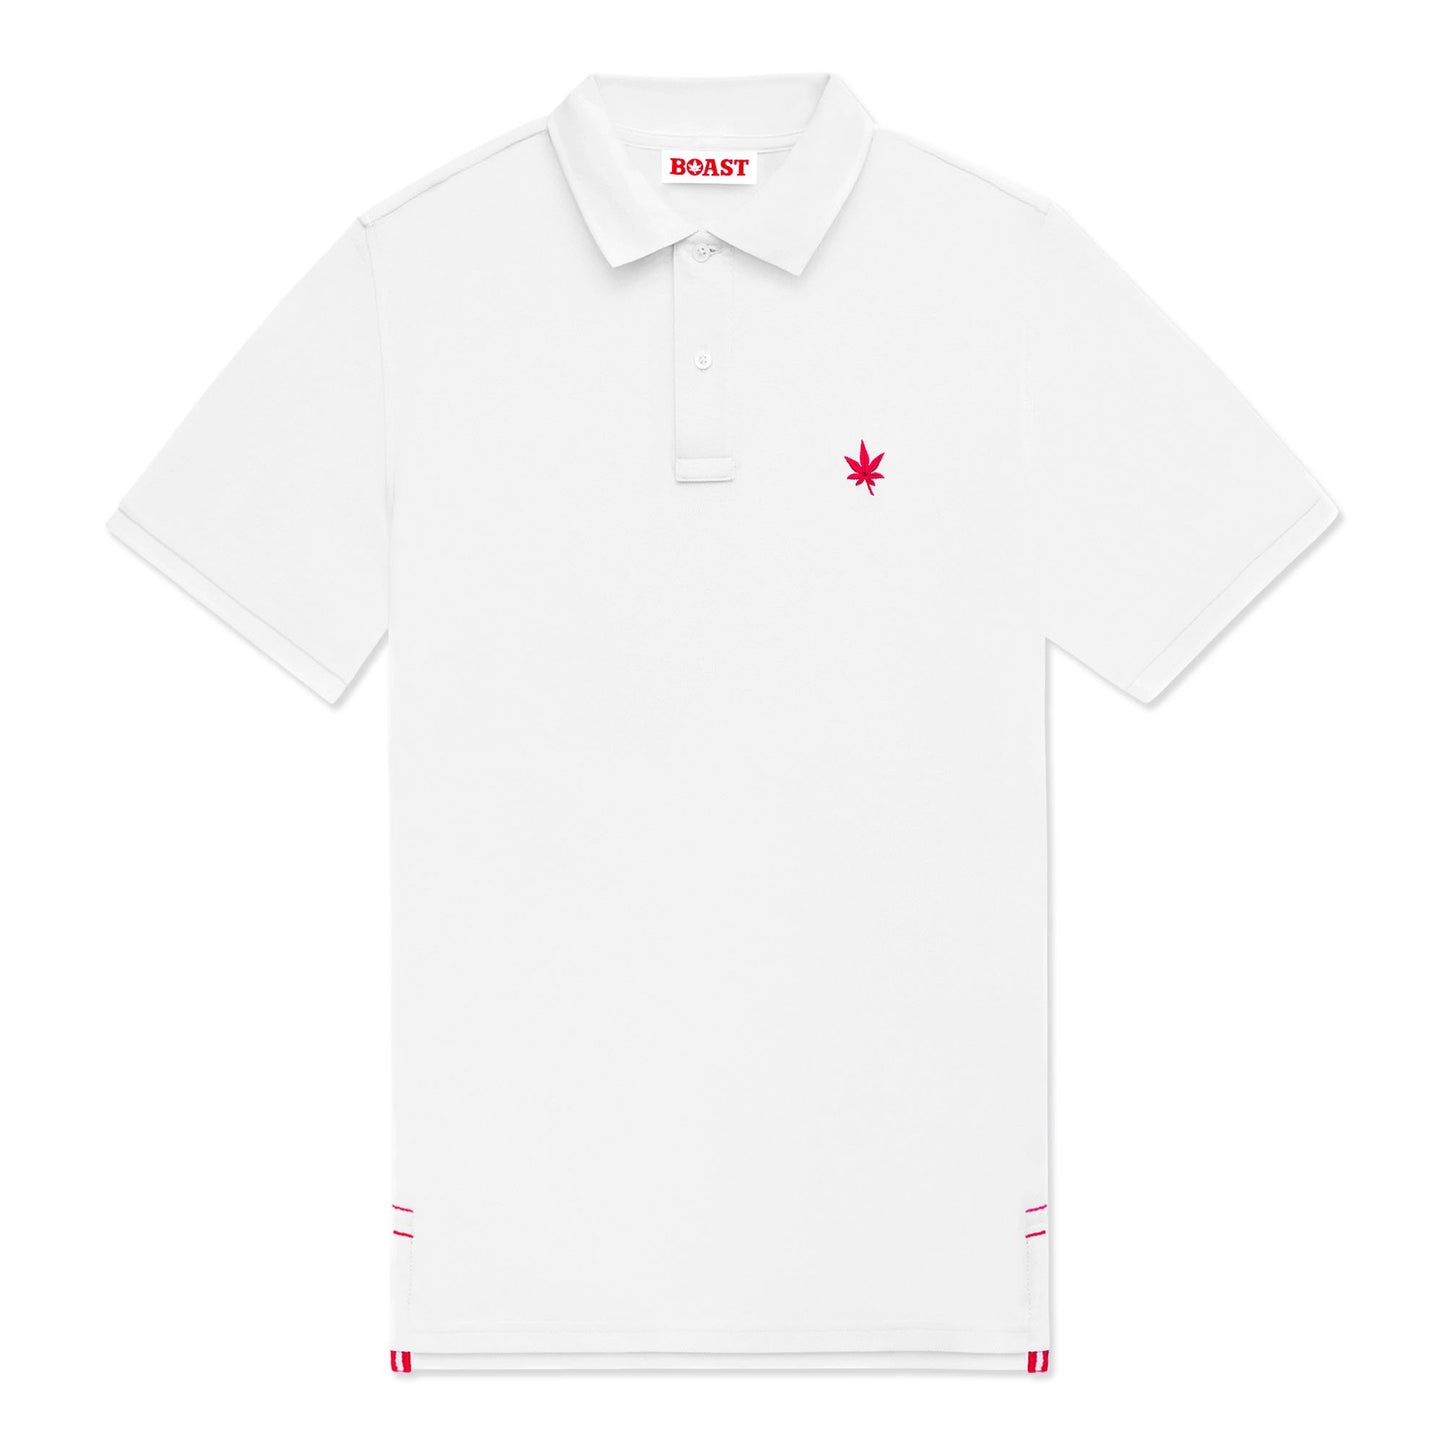 White polo with red embroidered leaf on the left chest.